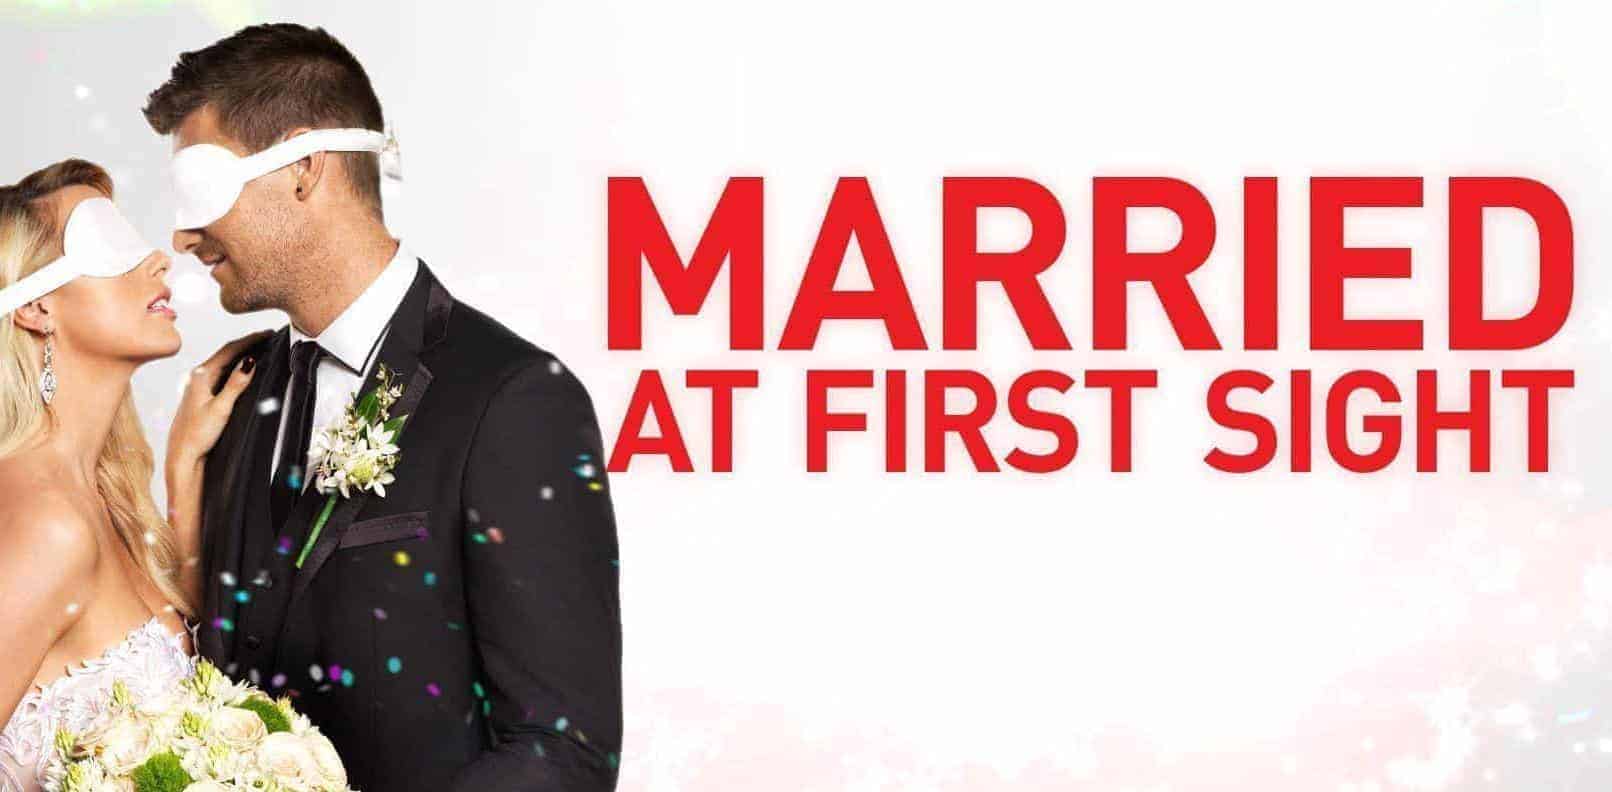 Married At First Sight Australia11 1 1 1 1 1